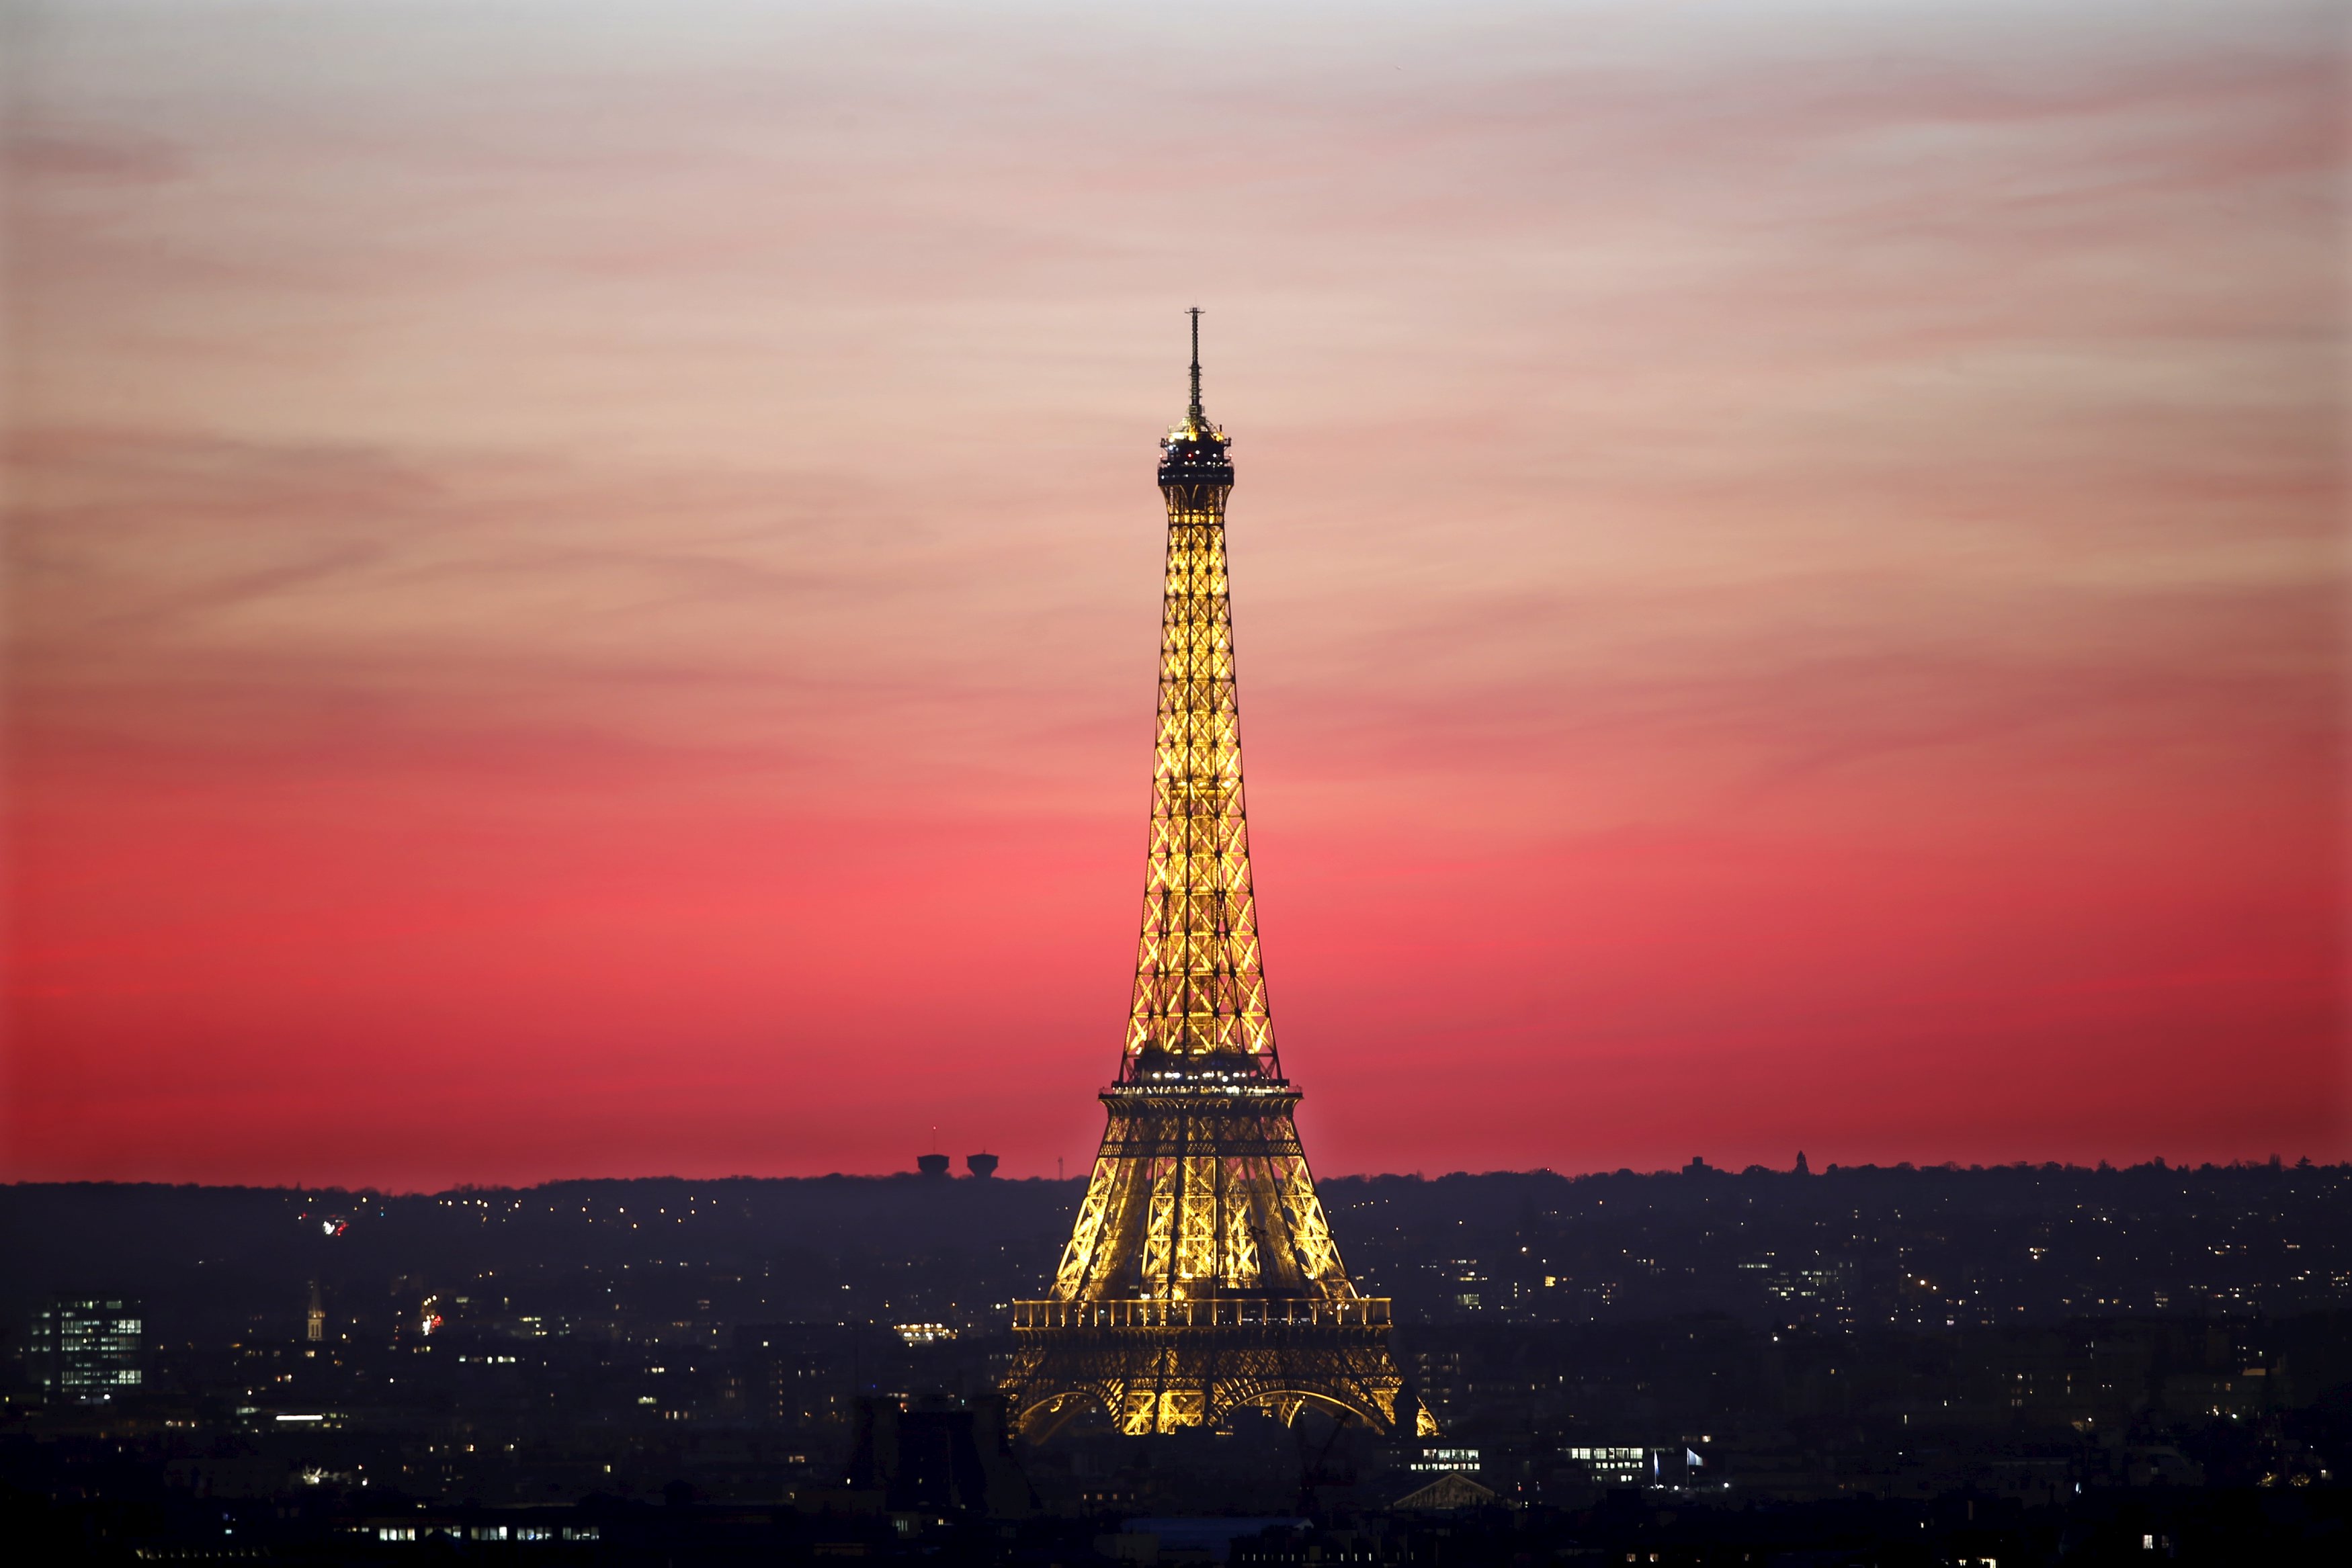 The Eiffel Tower is seen at sunset in Paris, France, November 9, 2015. The capital will host the World Climate Change Conference 2015 (COP21) from November 30 to December 11. REUTERS/Charles Platiau